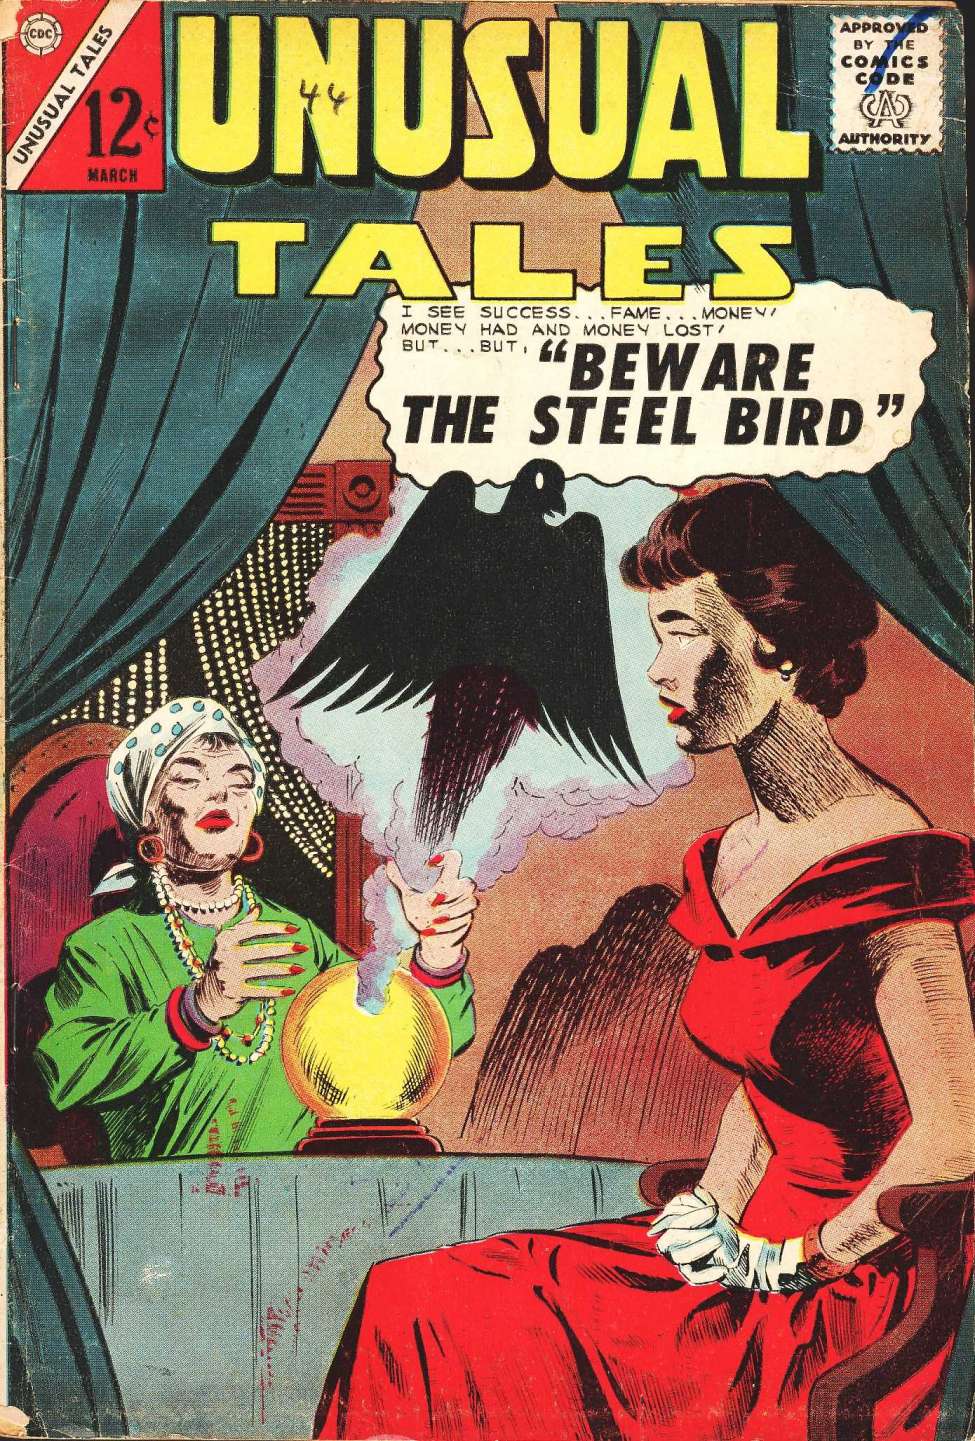 Comic Book Cover For Unusual Tales 44